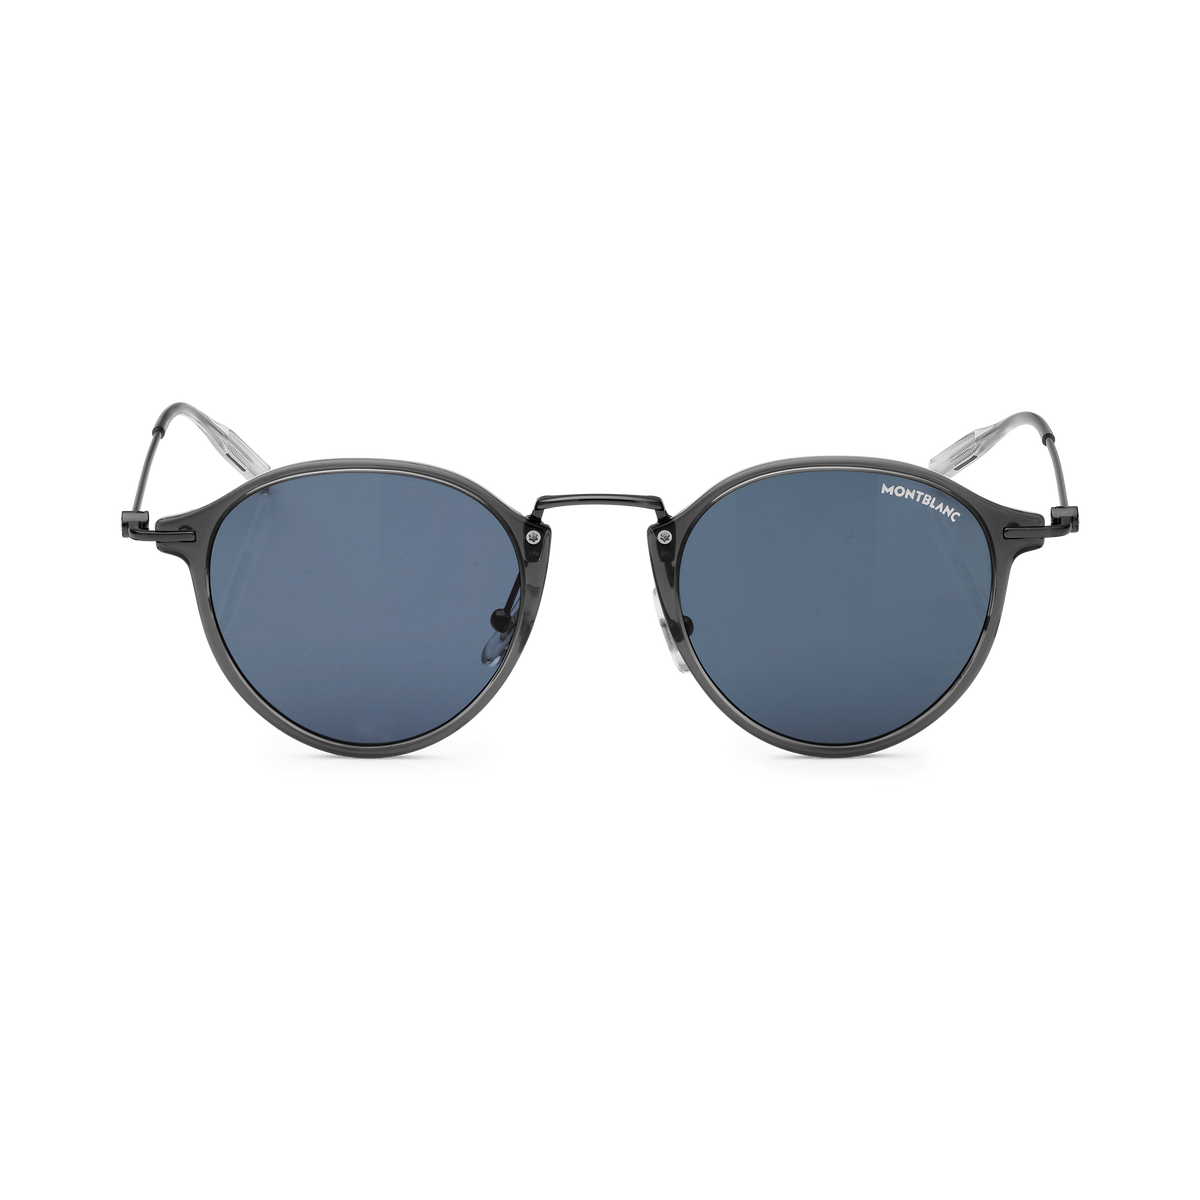 Round Sunglasses with Gray Injected Frame